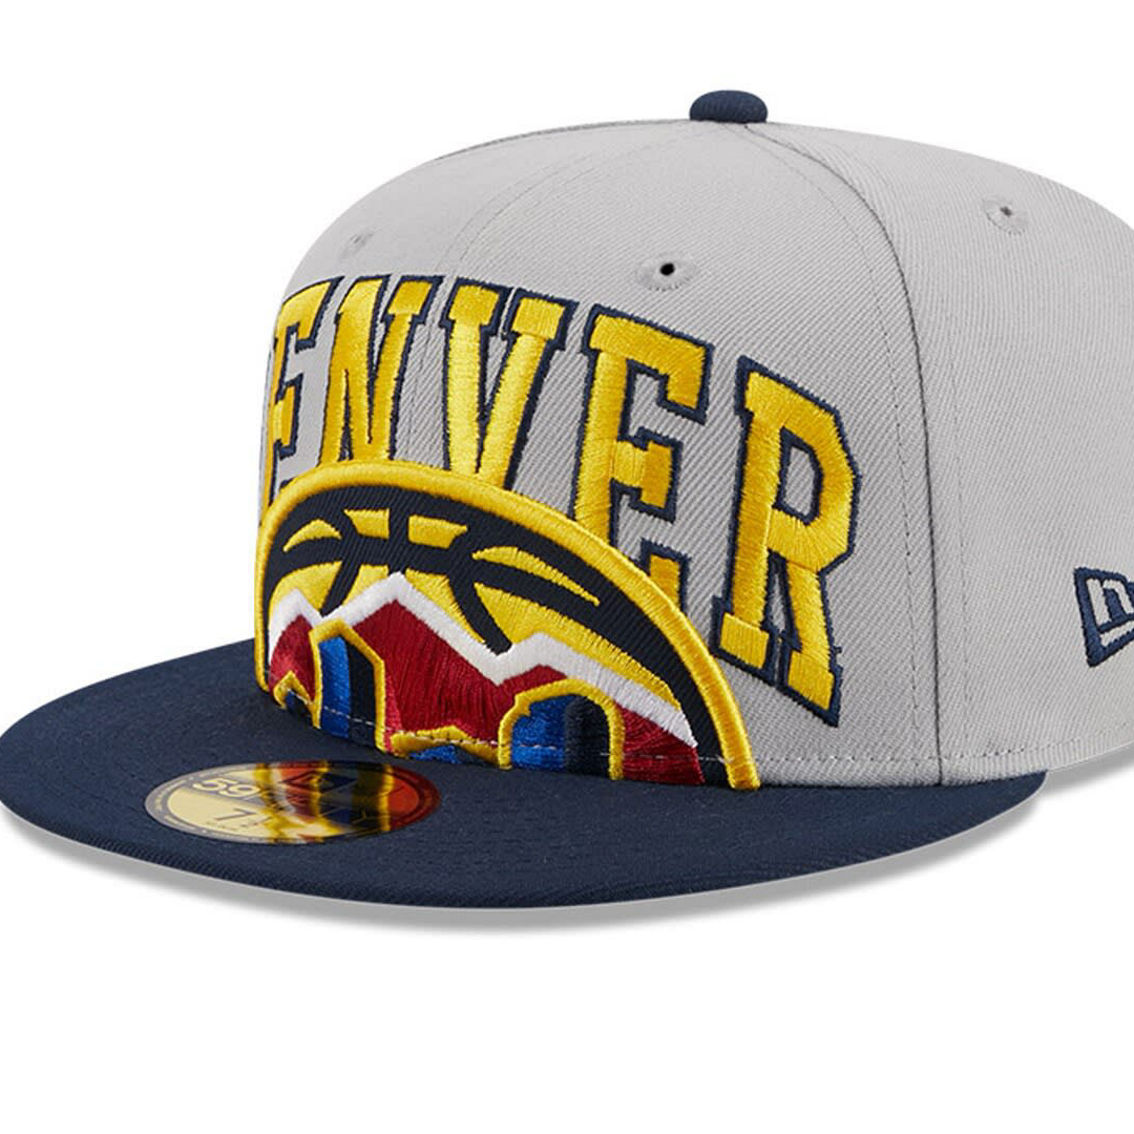 New Era Men's Gray/Navy Denver Nuggets Tip-Off Two-Tone 59FIFTY Fitted Hat - Image 2 of 4